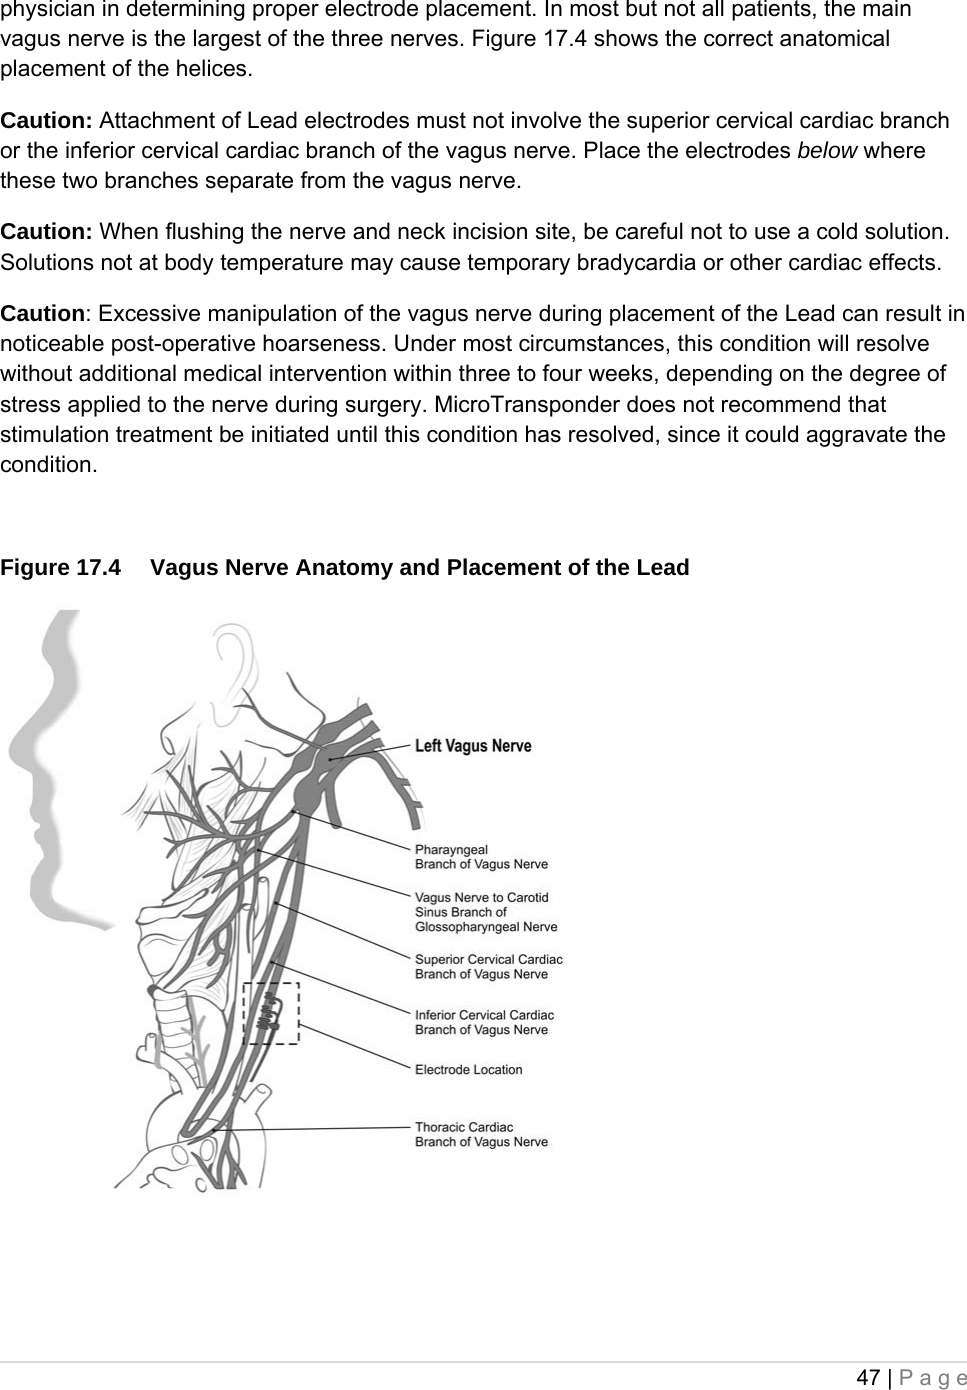 47 | Page  physician in determining proper electrode placement. In most but not all patients, the main vagus nerve is the largest of the three nerves. Figure 17.4 shows the correct anatomical placement of the helices. Caution: Attachment of Lead electrodes must not involve the superior cervical cardiac branch or the inferior cervical cardiac branch of the vagus nerve. Place the electrodes below where these two branches separate from the vagus nerve. Caution: When flushing the nerve and neck incision site, be careful not to use a cold solution.  Solutions not at body temperature may cause temporary bradycardia or other cardiac effects.   Caution: Excessive manipulation of the vagus nerve during placement of the Lead can result in noticeable post-operative hoarseness. Under most circumstances, this condition will resolve without additional medical intervention within three to four weeks, depending on the degree of stress applied to the nerve during surgery. MicroTransponder does not recommend that stimulation treatment be initiated until this condition has resolved, since it could aggravate the condition.  Figure 17.4  Vagus Nerve Anatomy and Placement of the Lead   